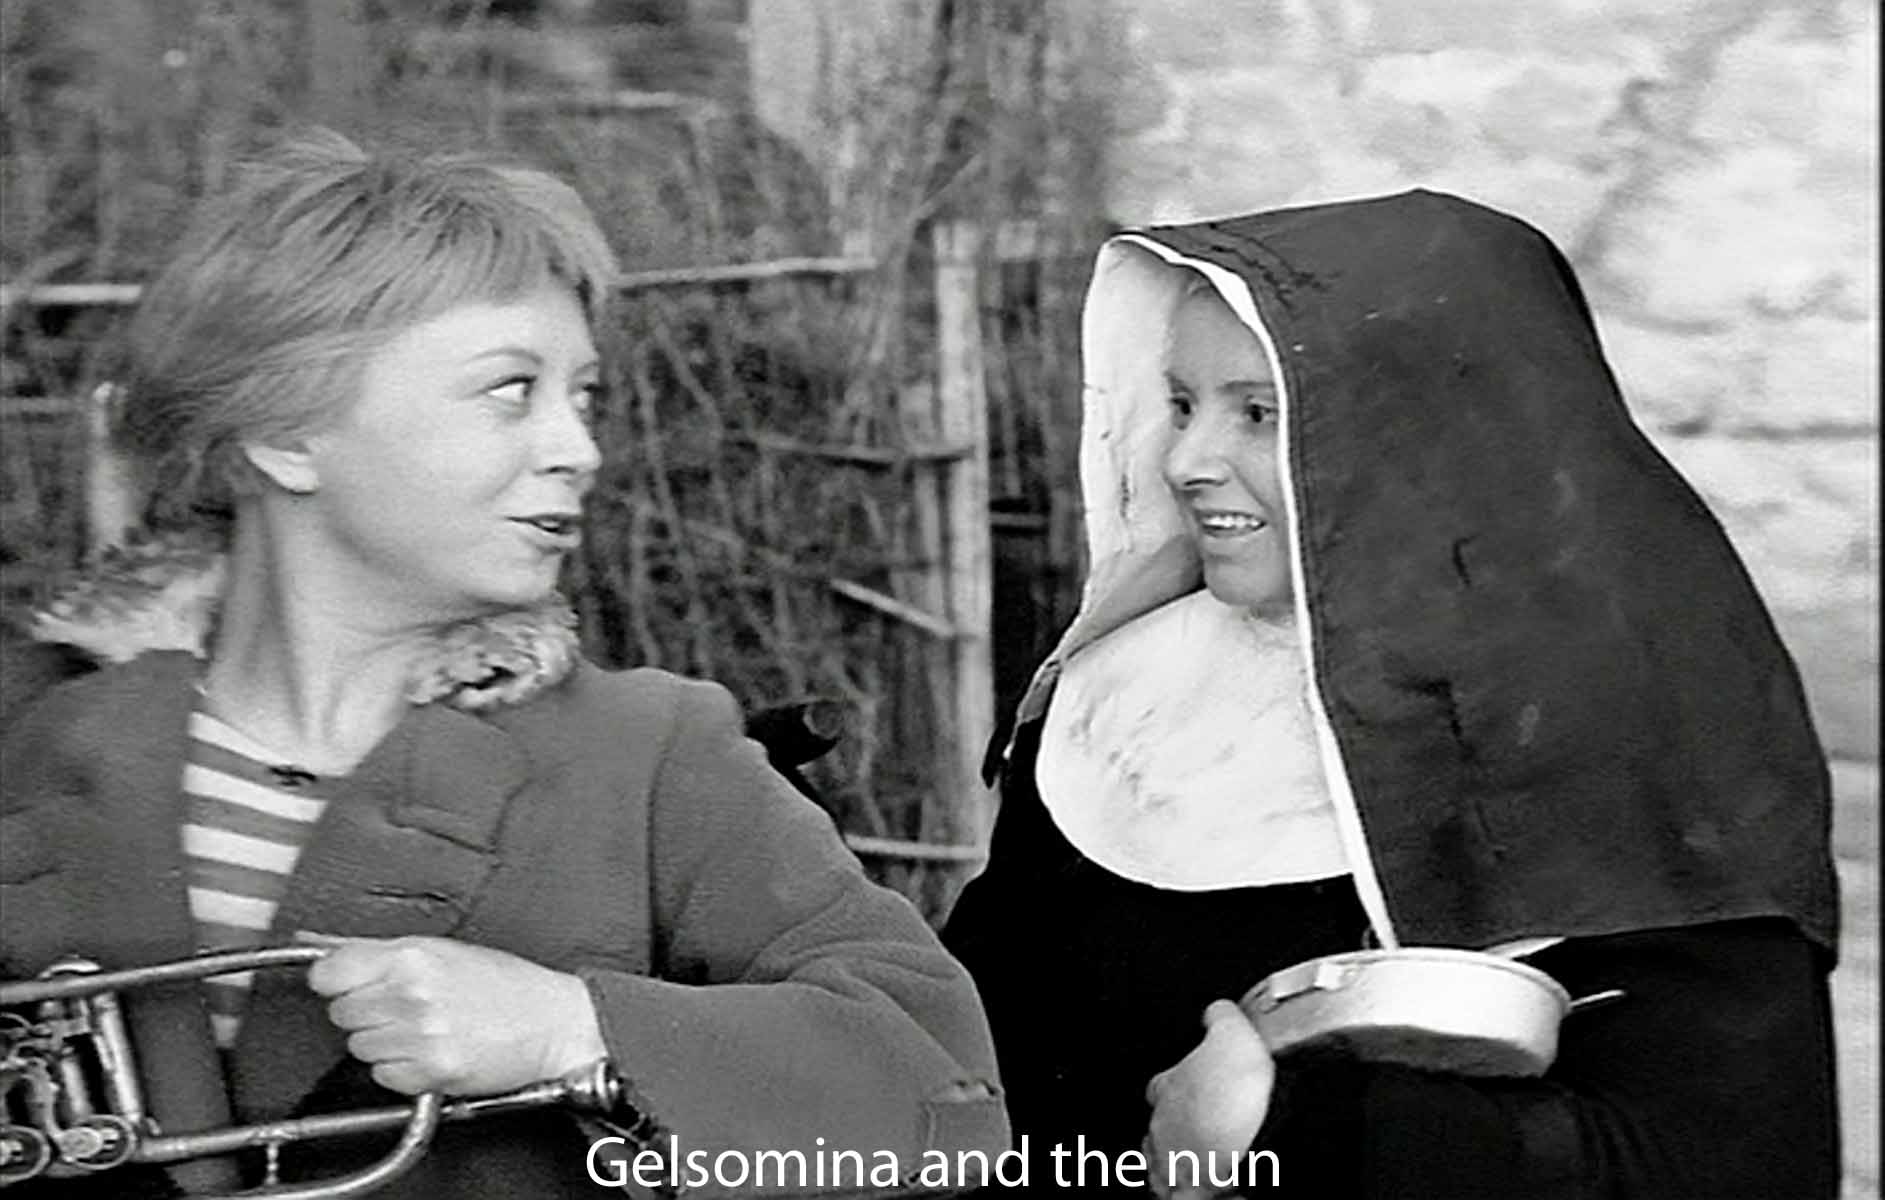 Gelsomina and the nun